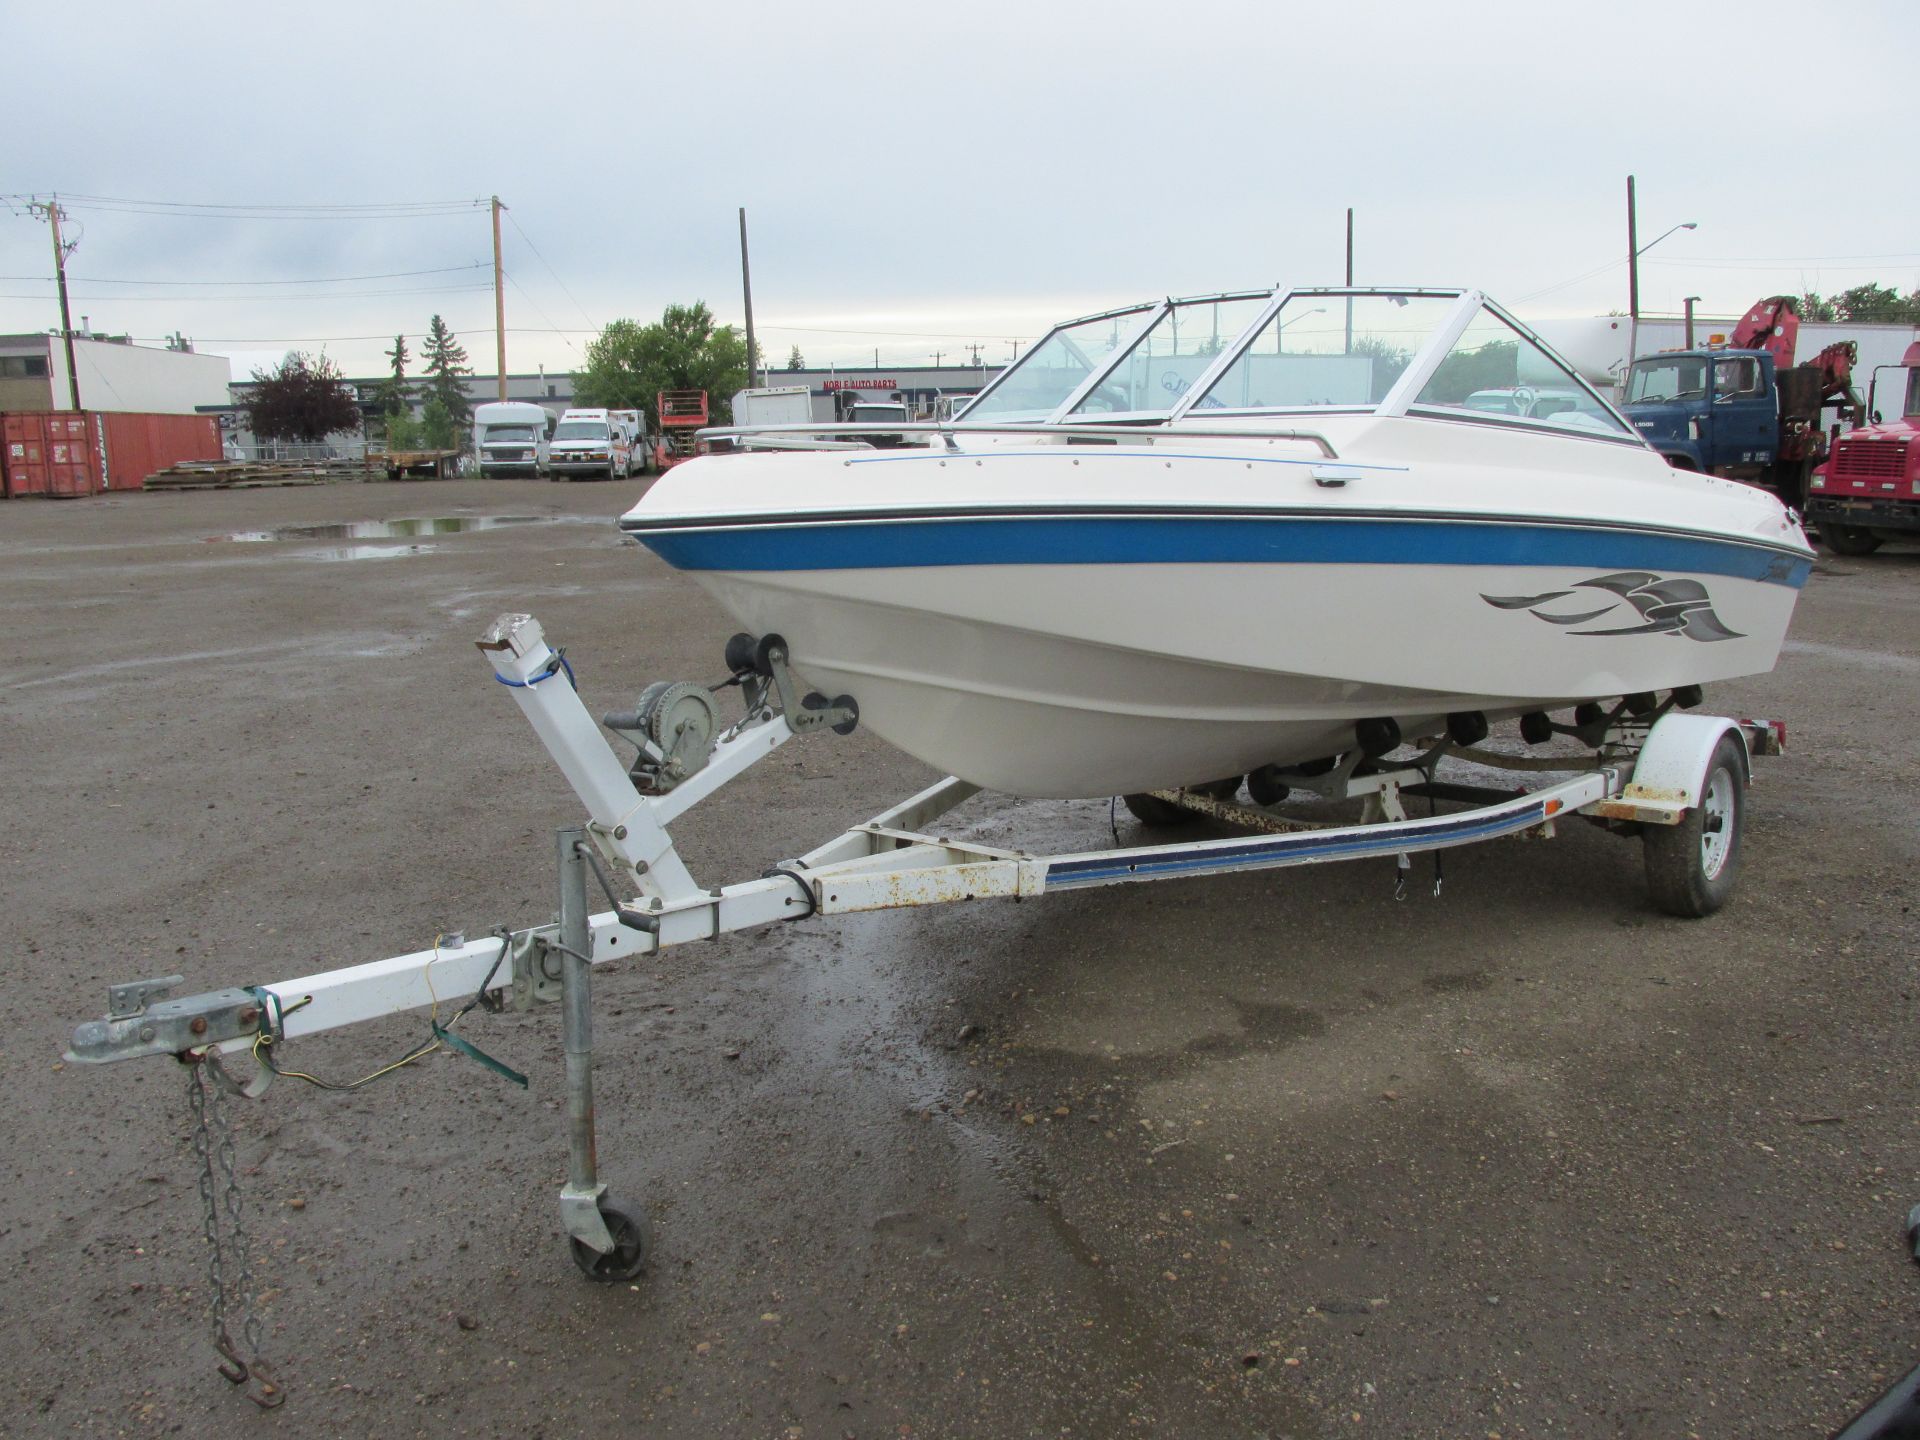 1992 SEASWIRL BOWRIDER 165SE OUTBOARD 115HP JOHNSON AUTOMATIC SN:BRCC057CE292 NOT REGISTERED NOTES: